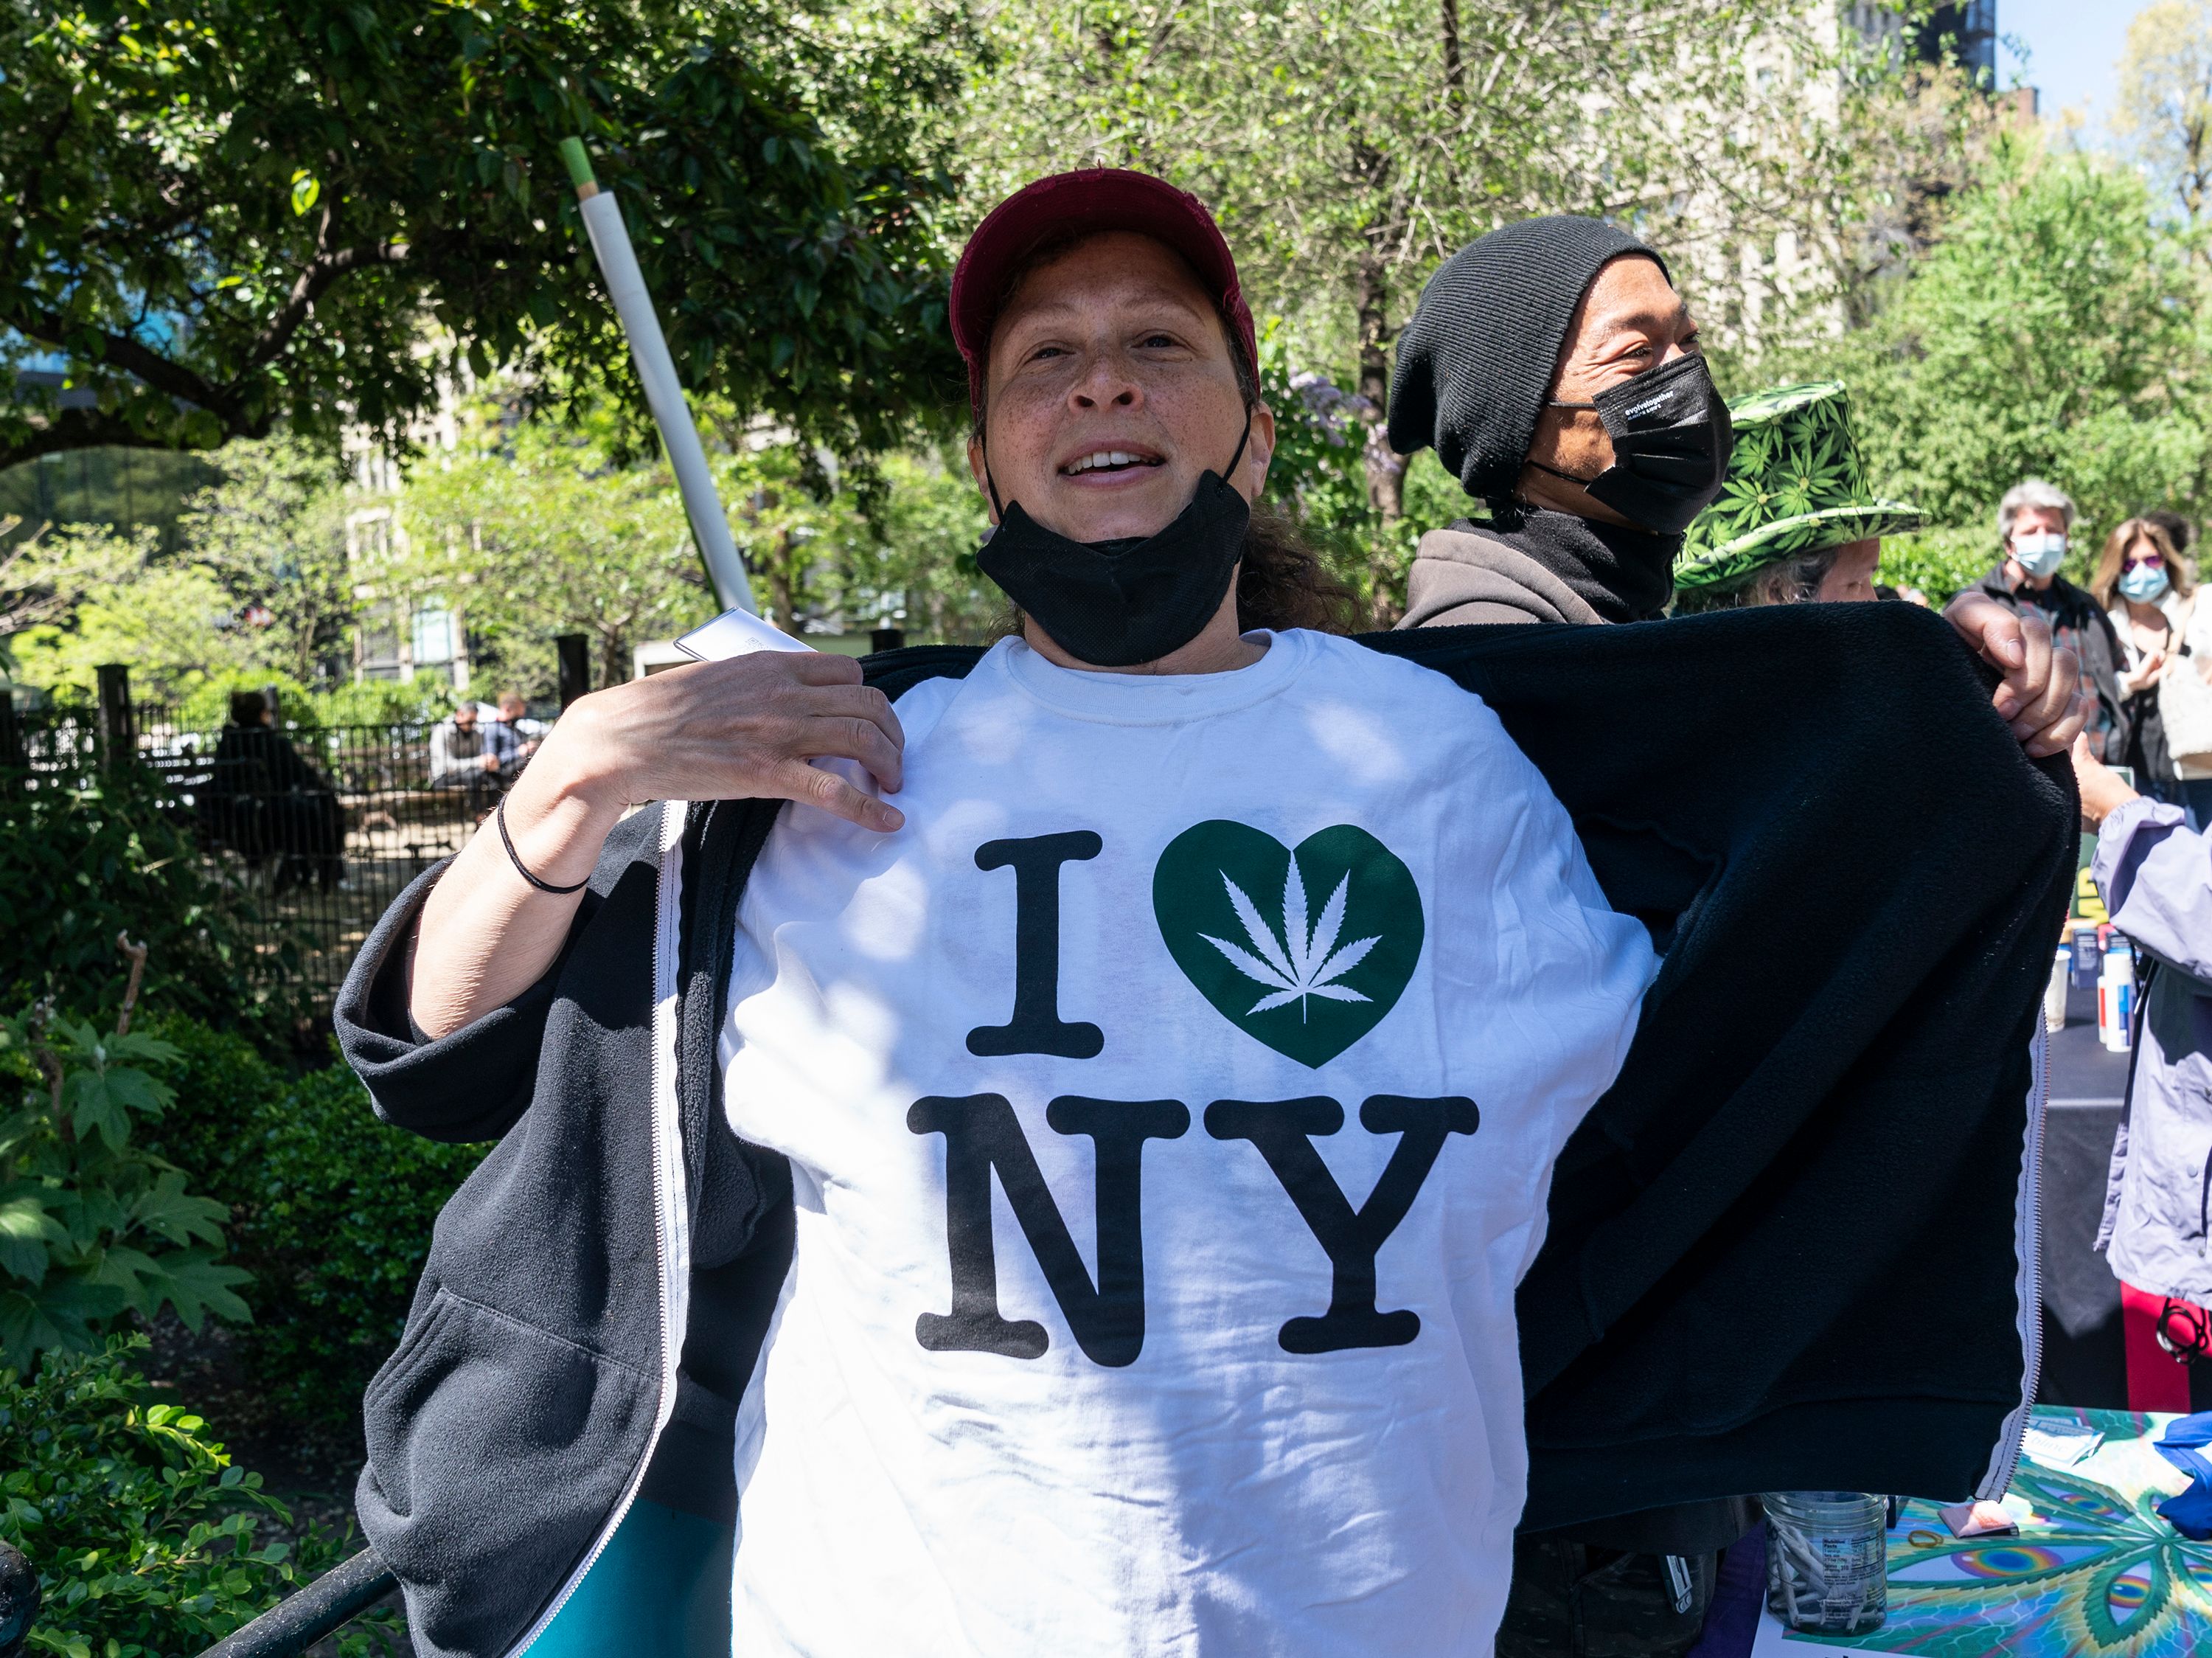 People congregate on Union Square for Annual Cannabis rally to celebrate legalization of recreational marijuana in New York State, May 1, 2021.